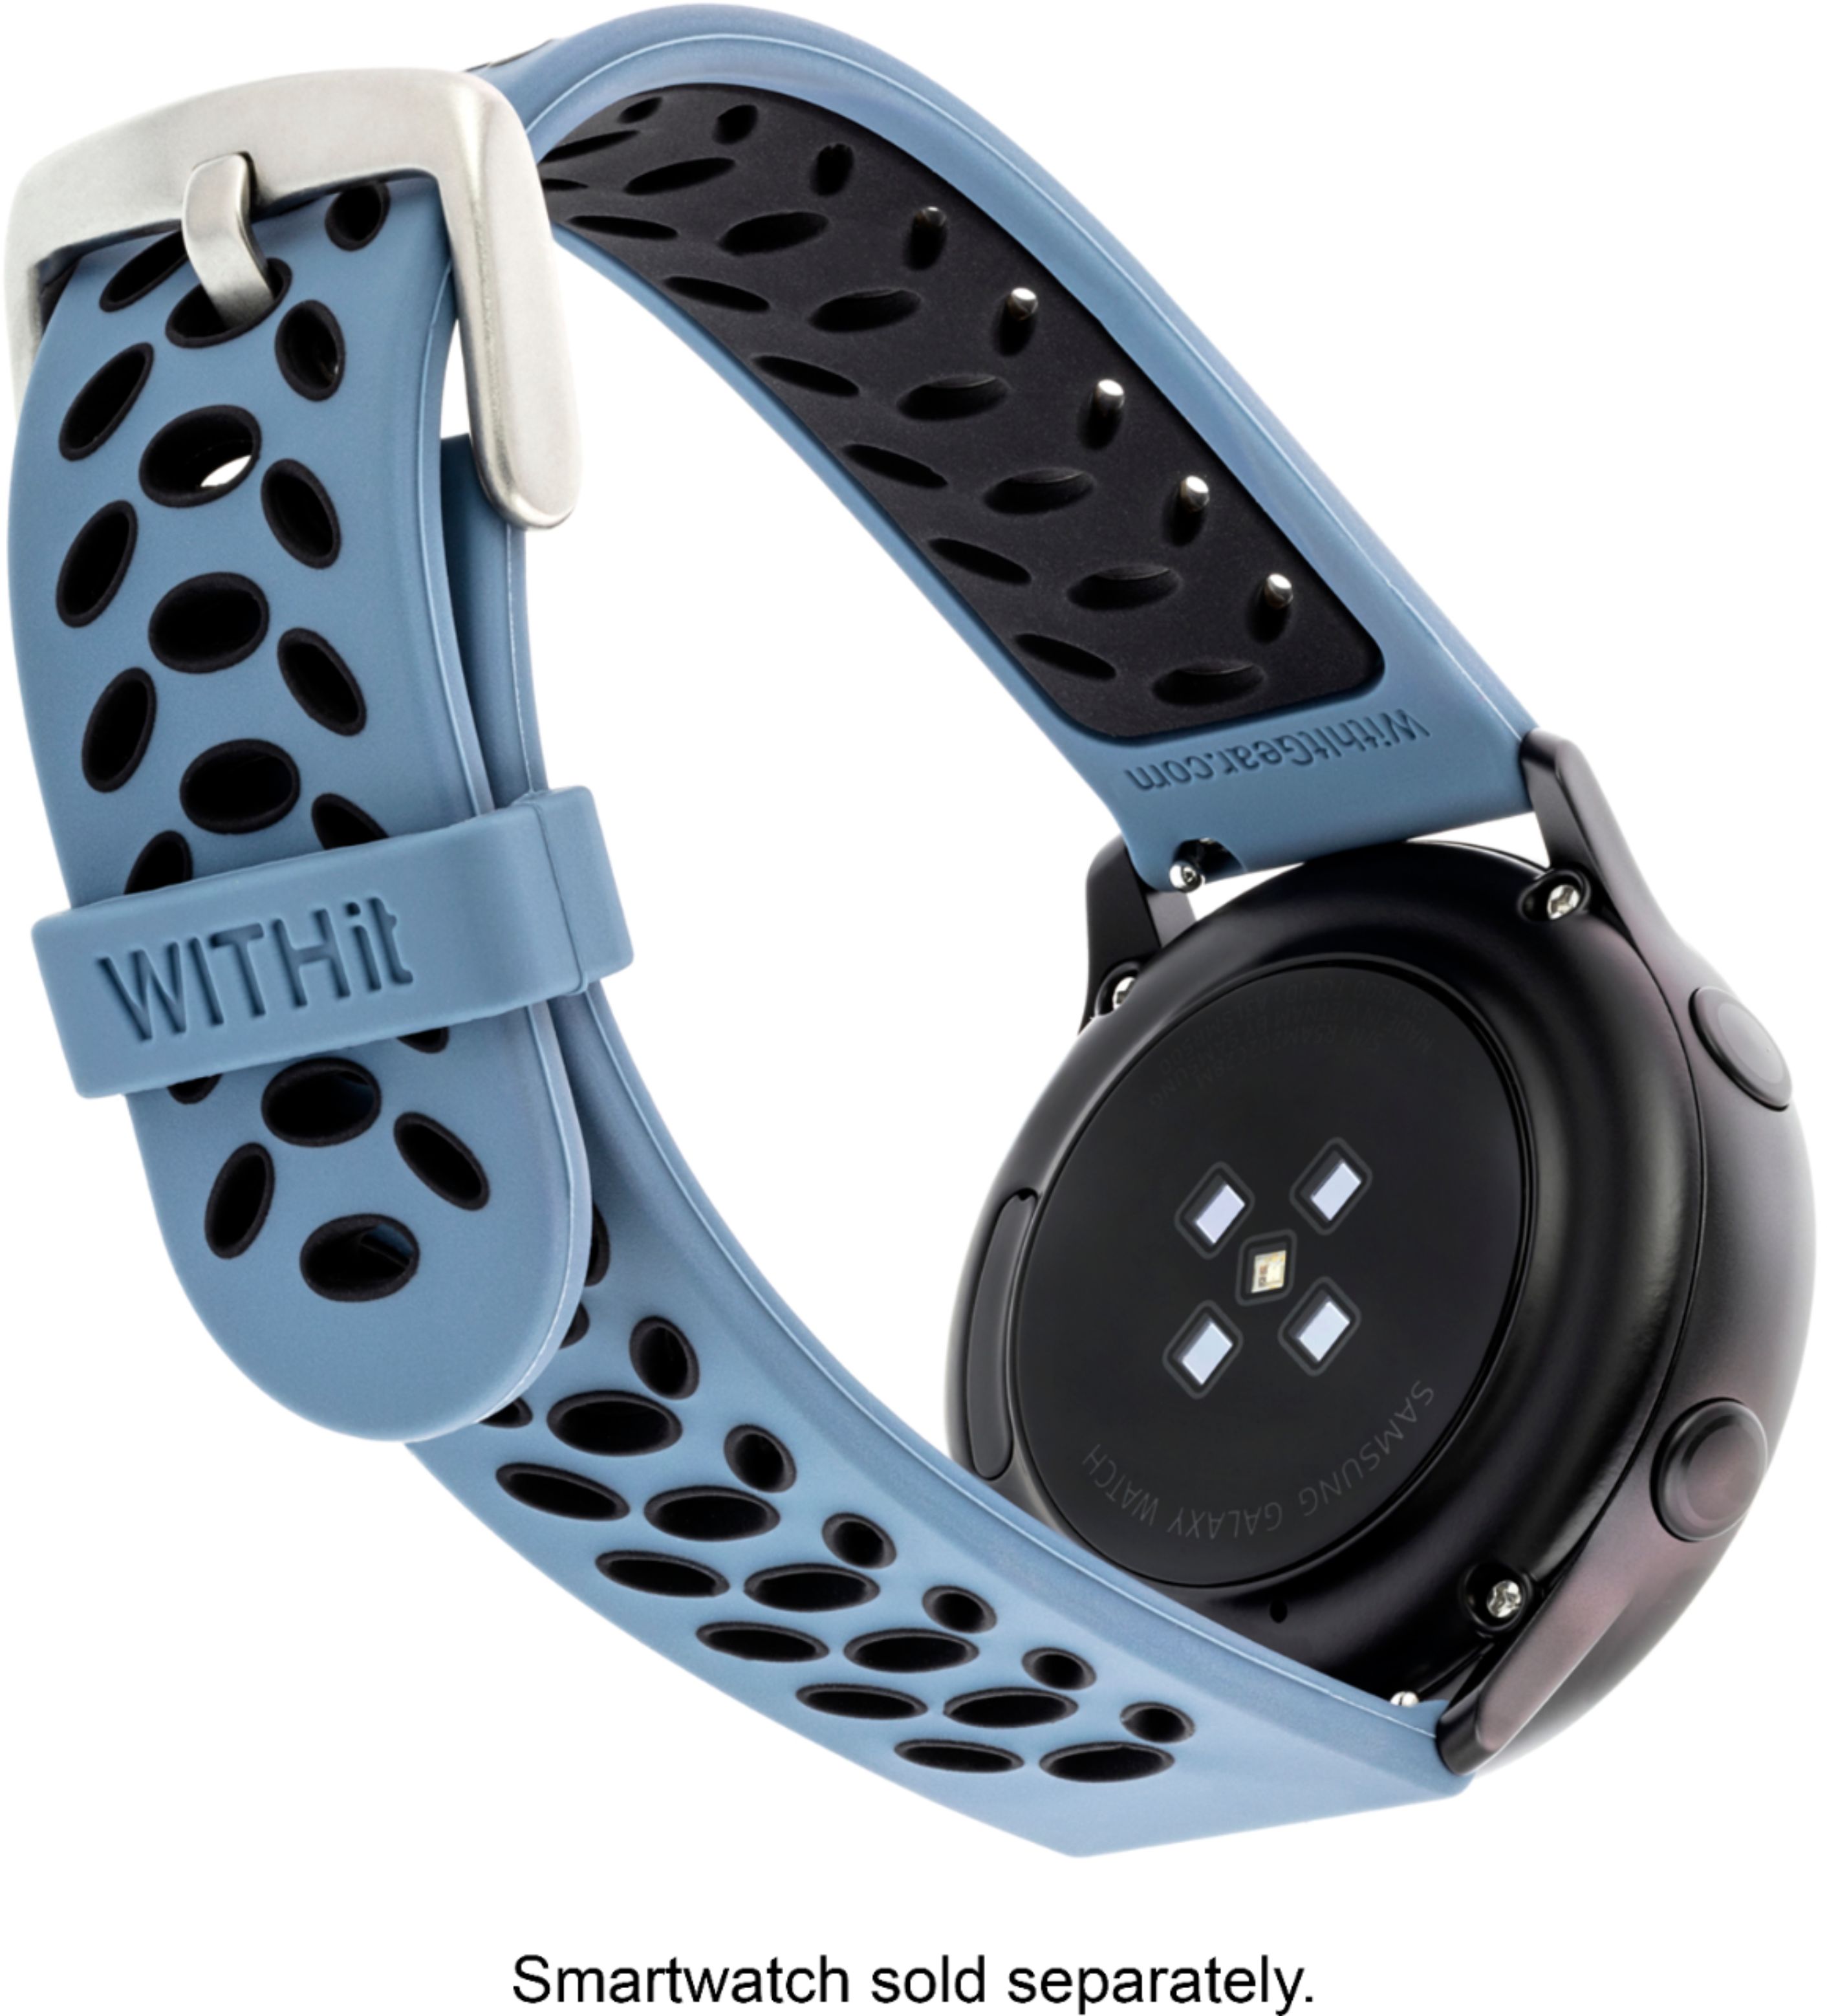 WITHit Band Kit for Samsung Galaxy Watch 46mm, Gear S3, Gear S3 Frontier, and Sport, Black